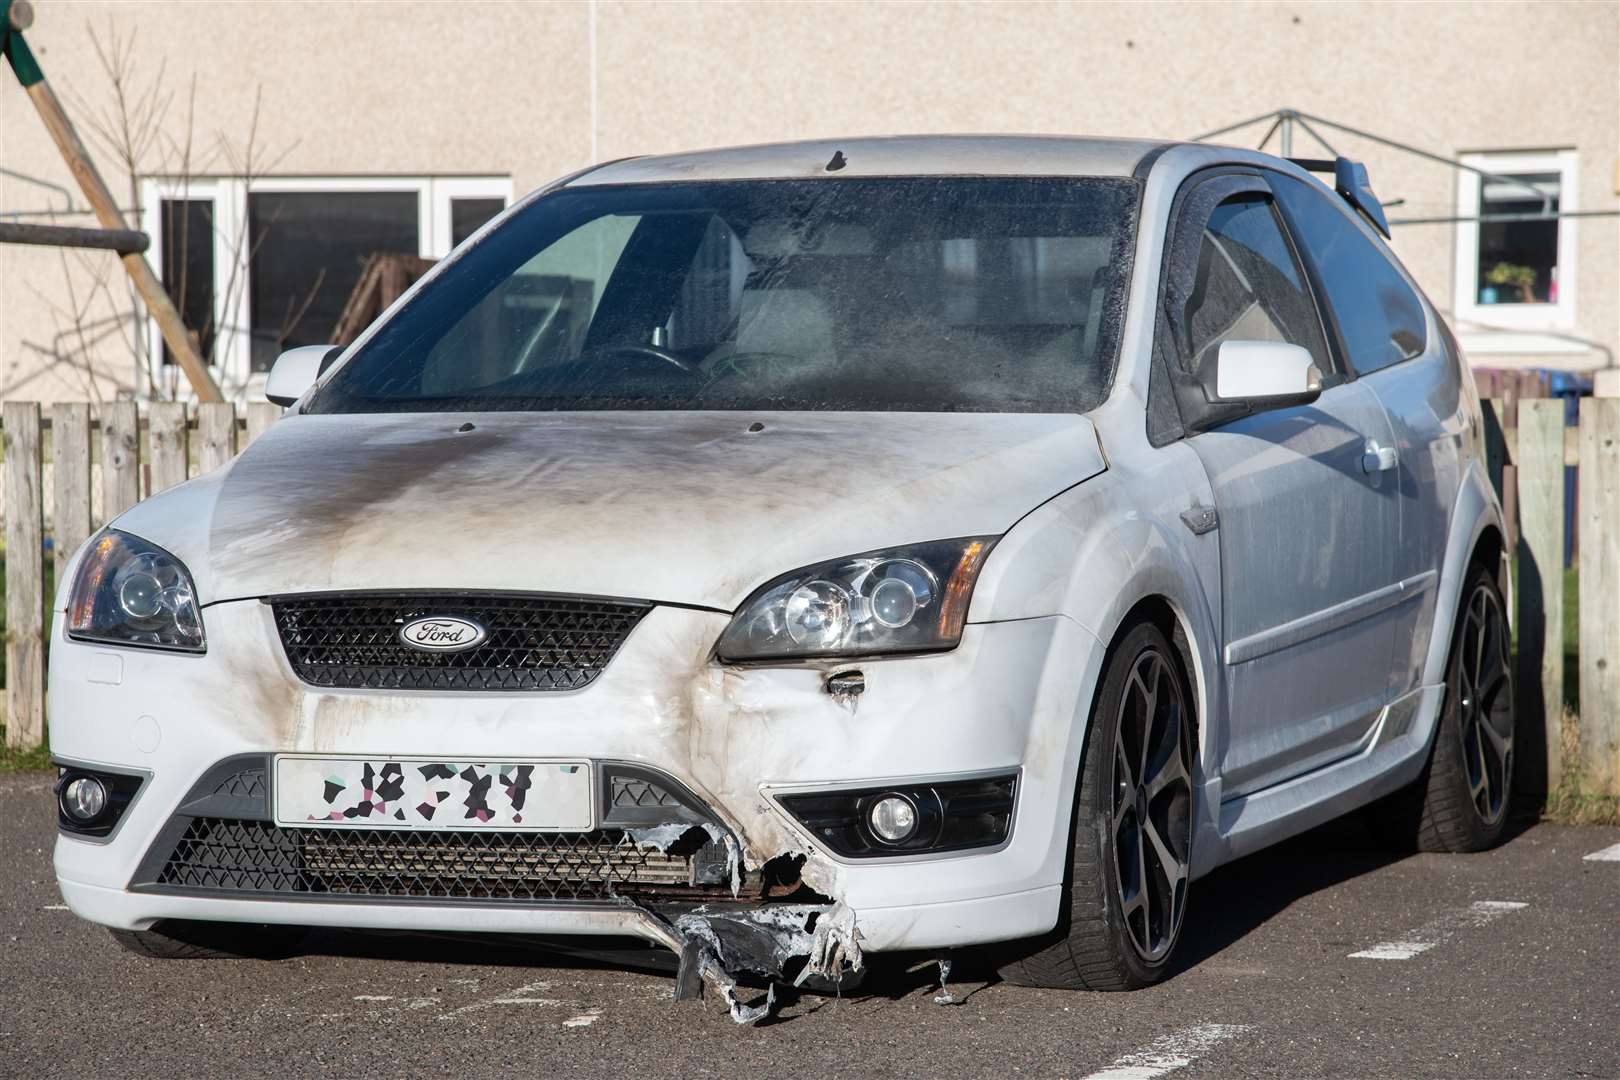 The white Ford Focus ST after the incident. Picture: Daniel Forsyth